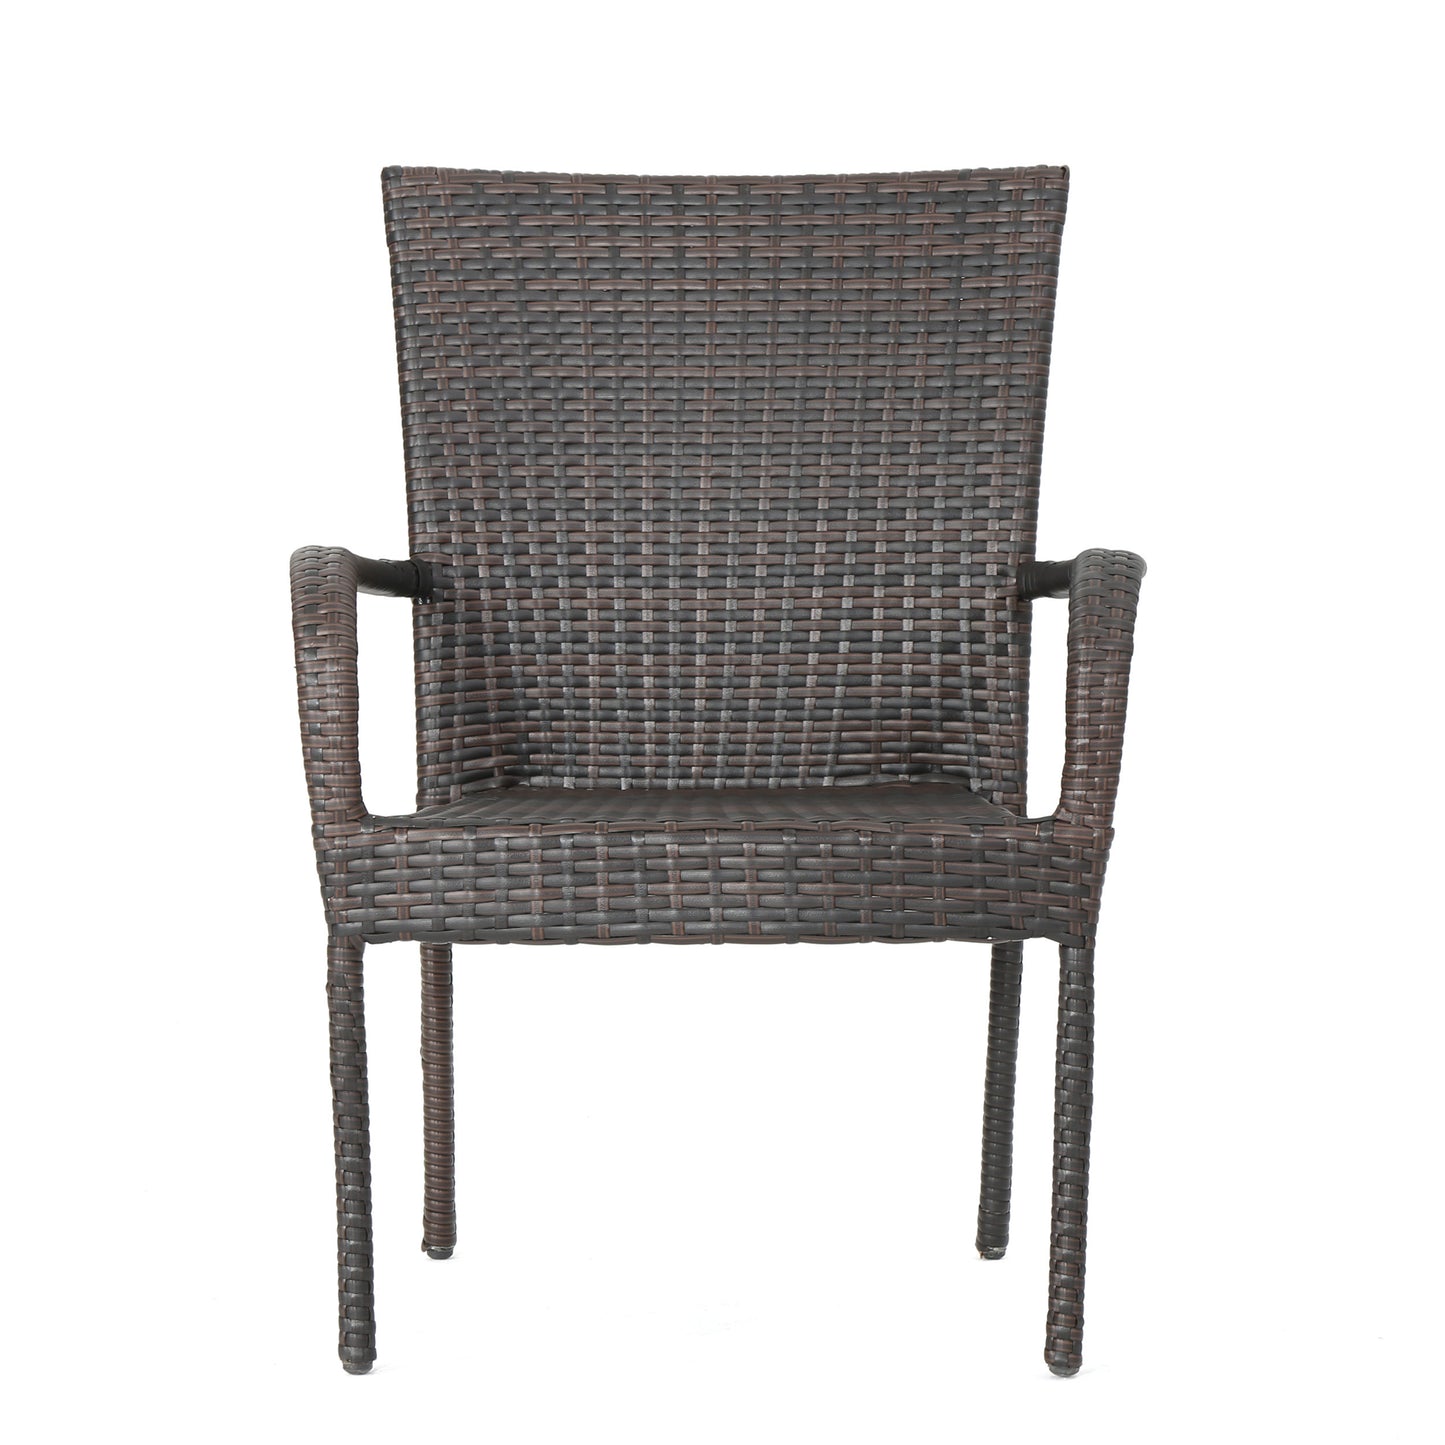 Kory Outdoor 5pc Multibrown Wicker Square Dining Set